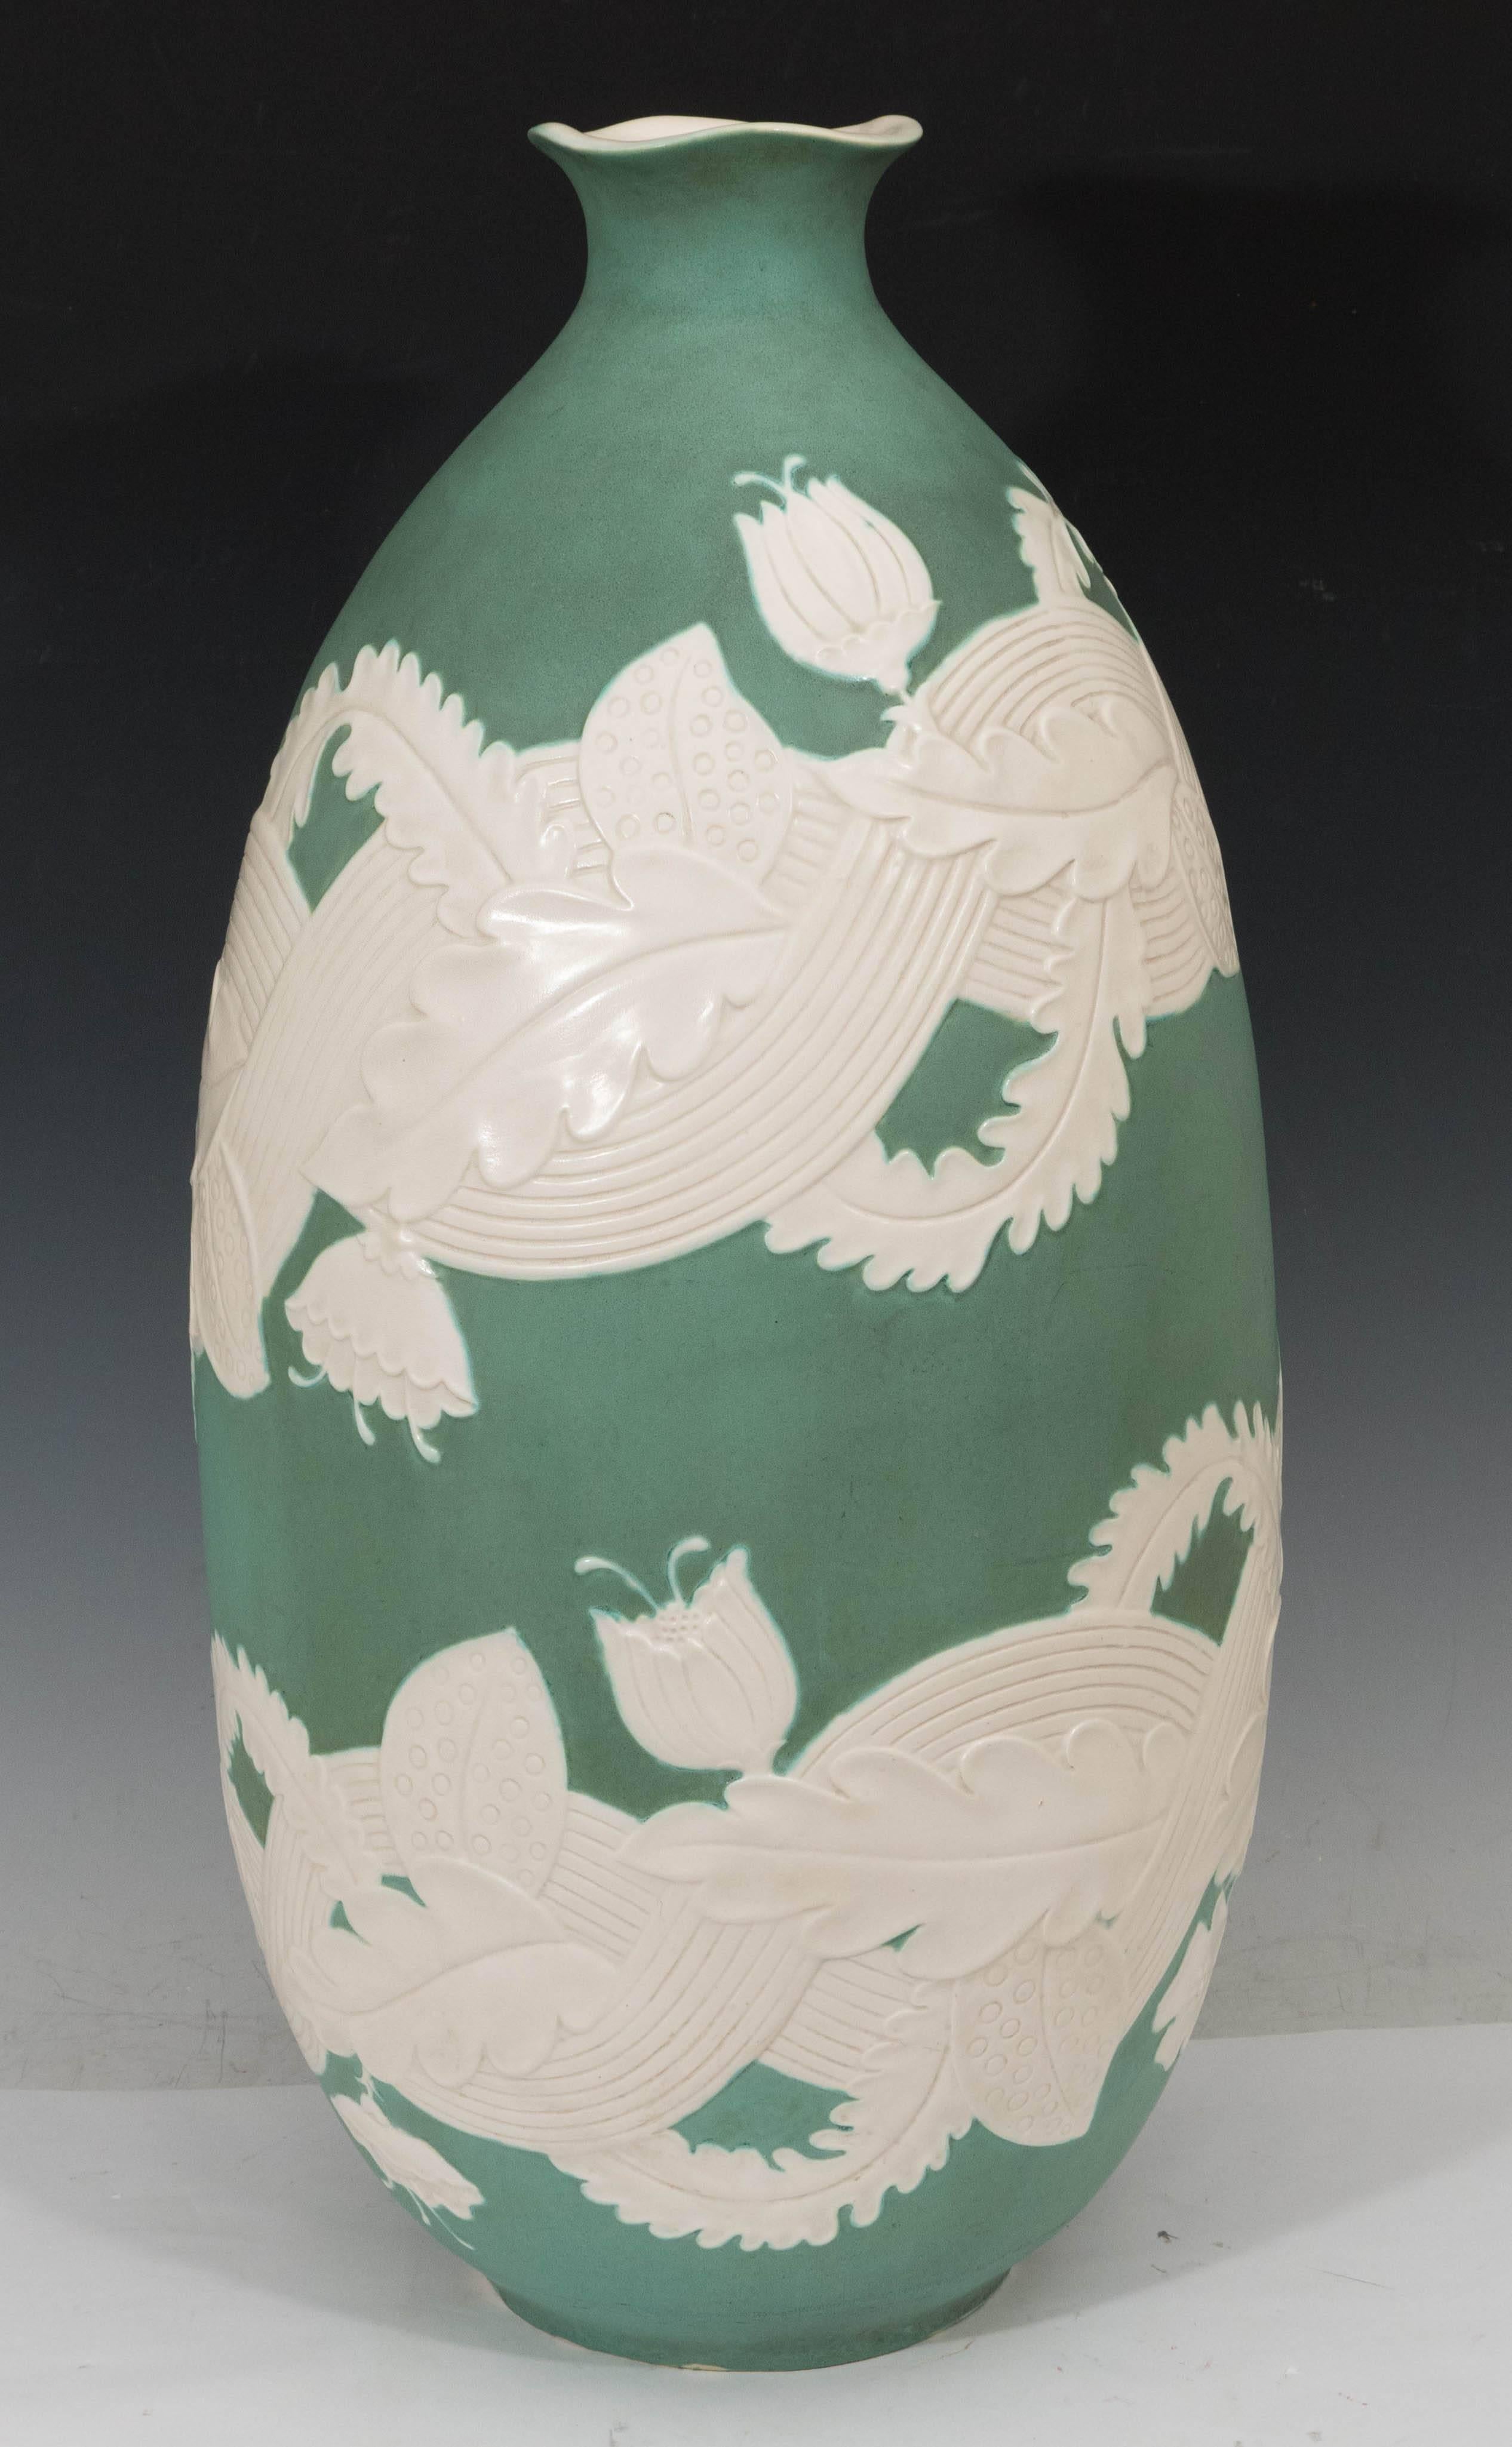 An impressive Italian ceramic vase by ceramicist Giovanni Gariboldi, produced circa 1940s for San Cristoforo-Richard Ginori, with glazed and incised details of intertwining foliate against a green matte ground, with curved rim and white interior.